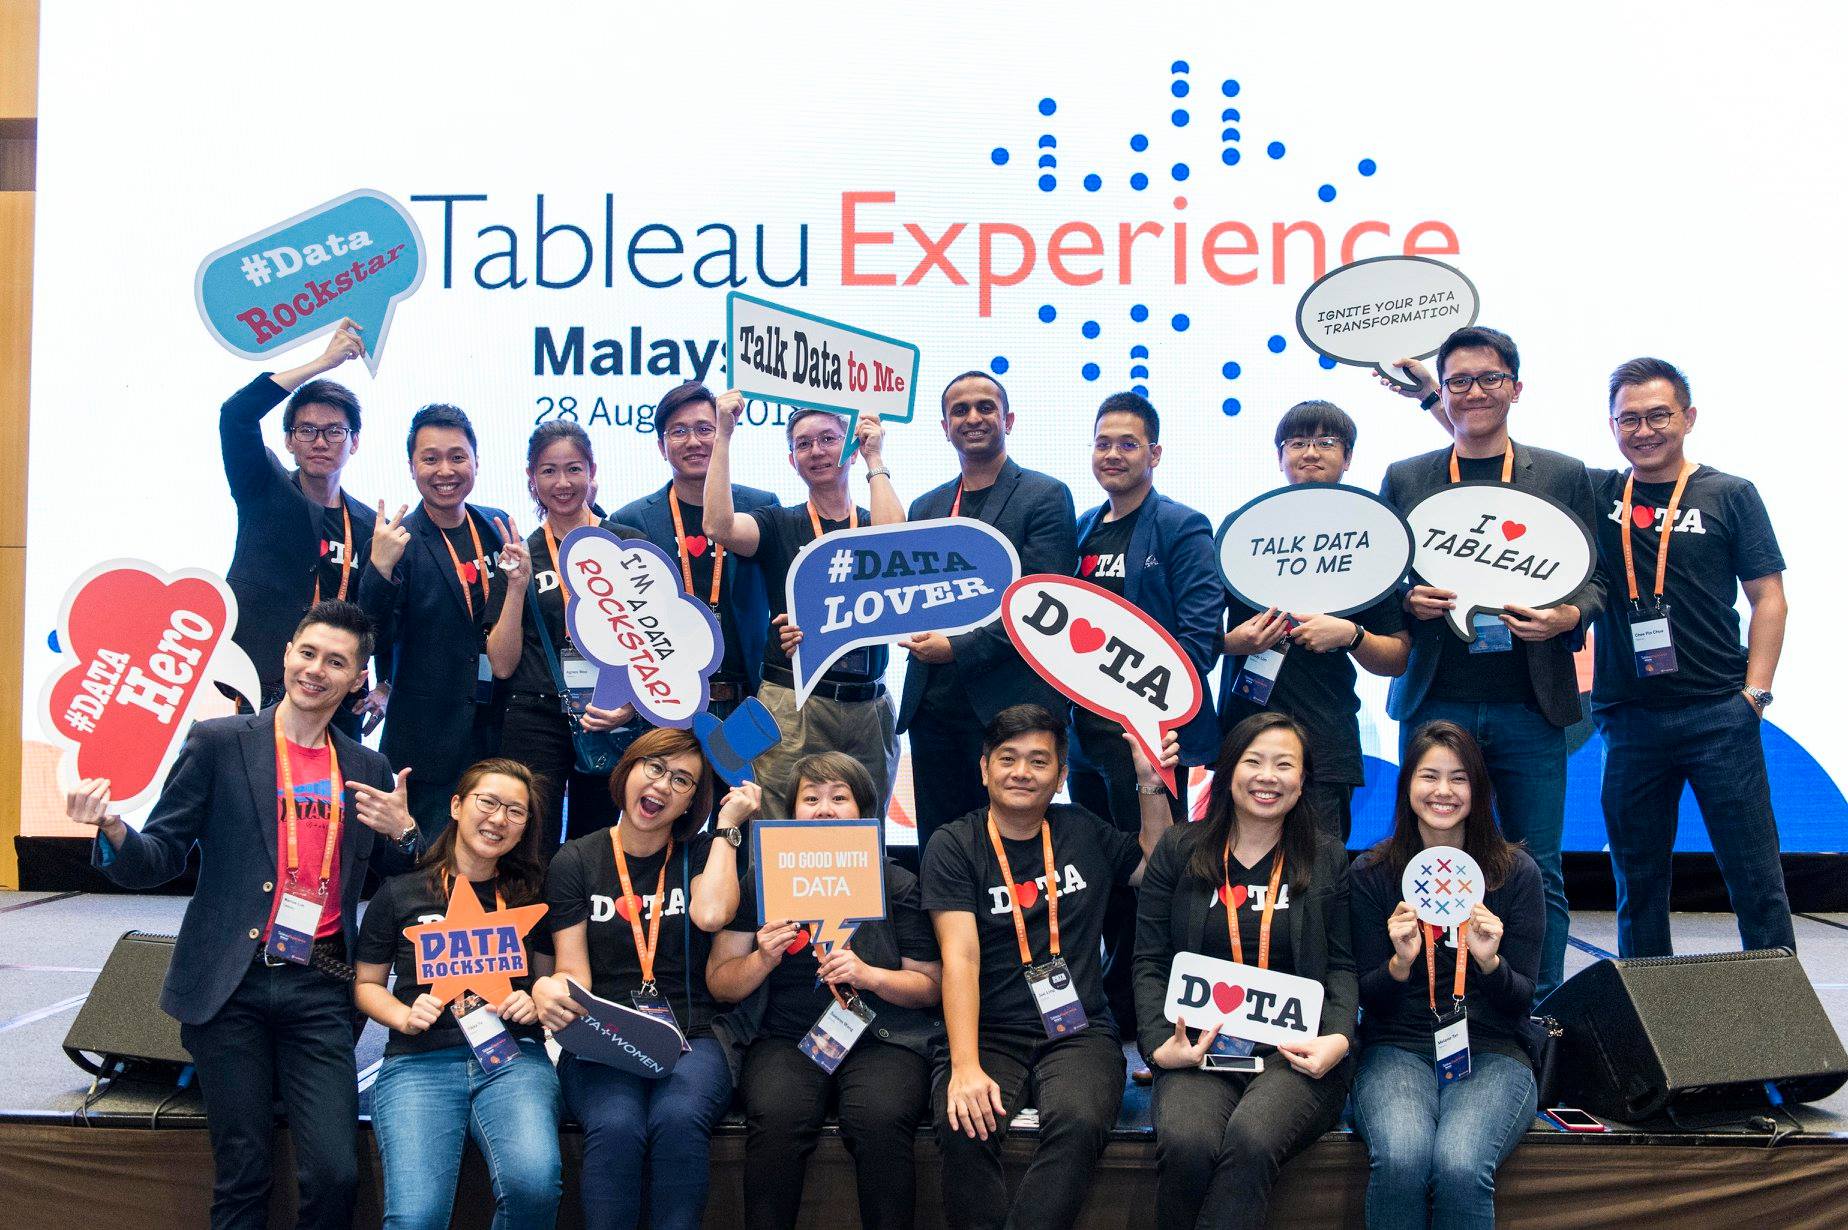 2018 Tableau Experience Malaysia, the coolest event for data lovers.